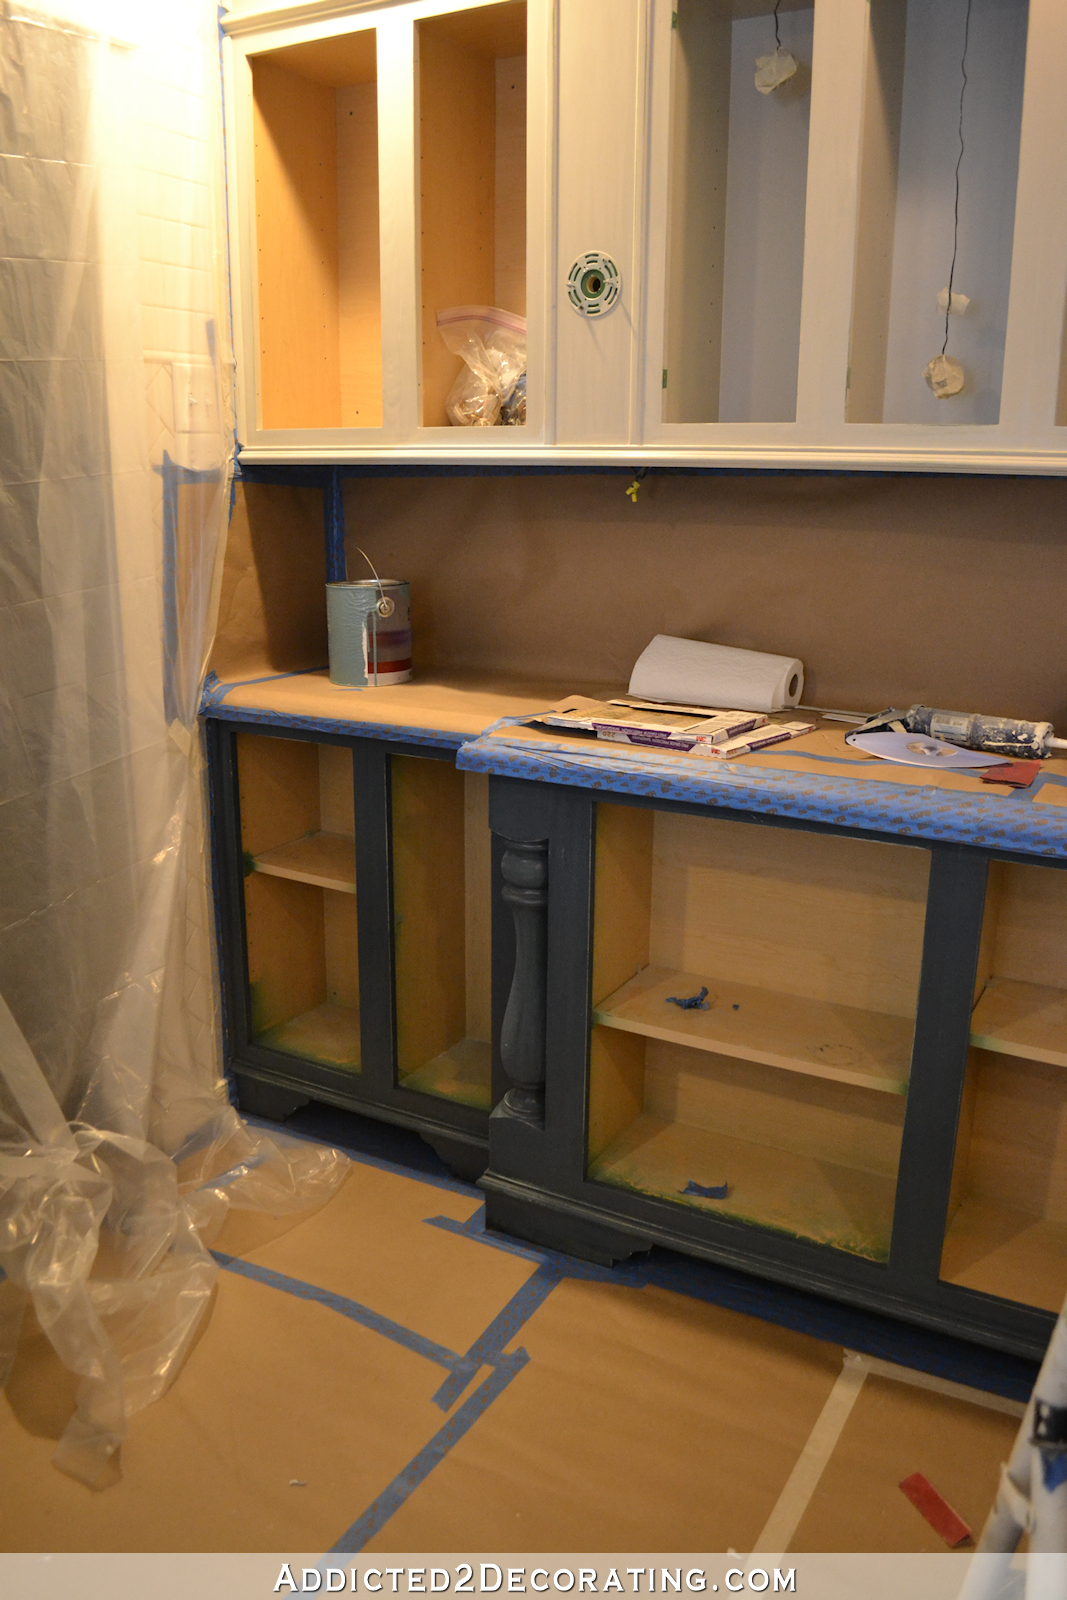 kitchen taped off and draped with plastic to prepare for spraying the cabinets - 3